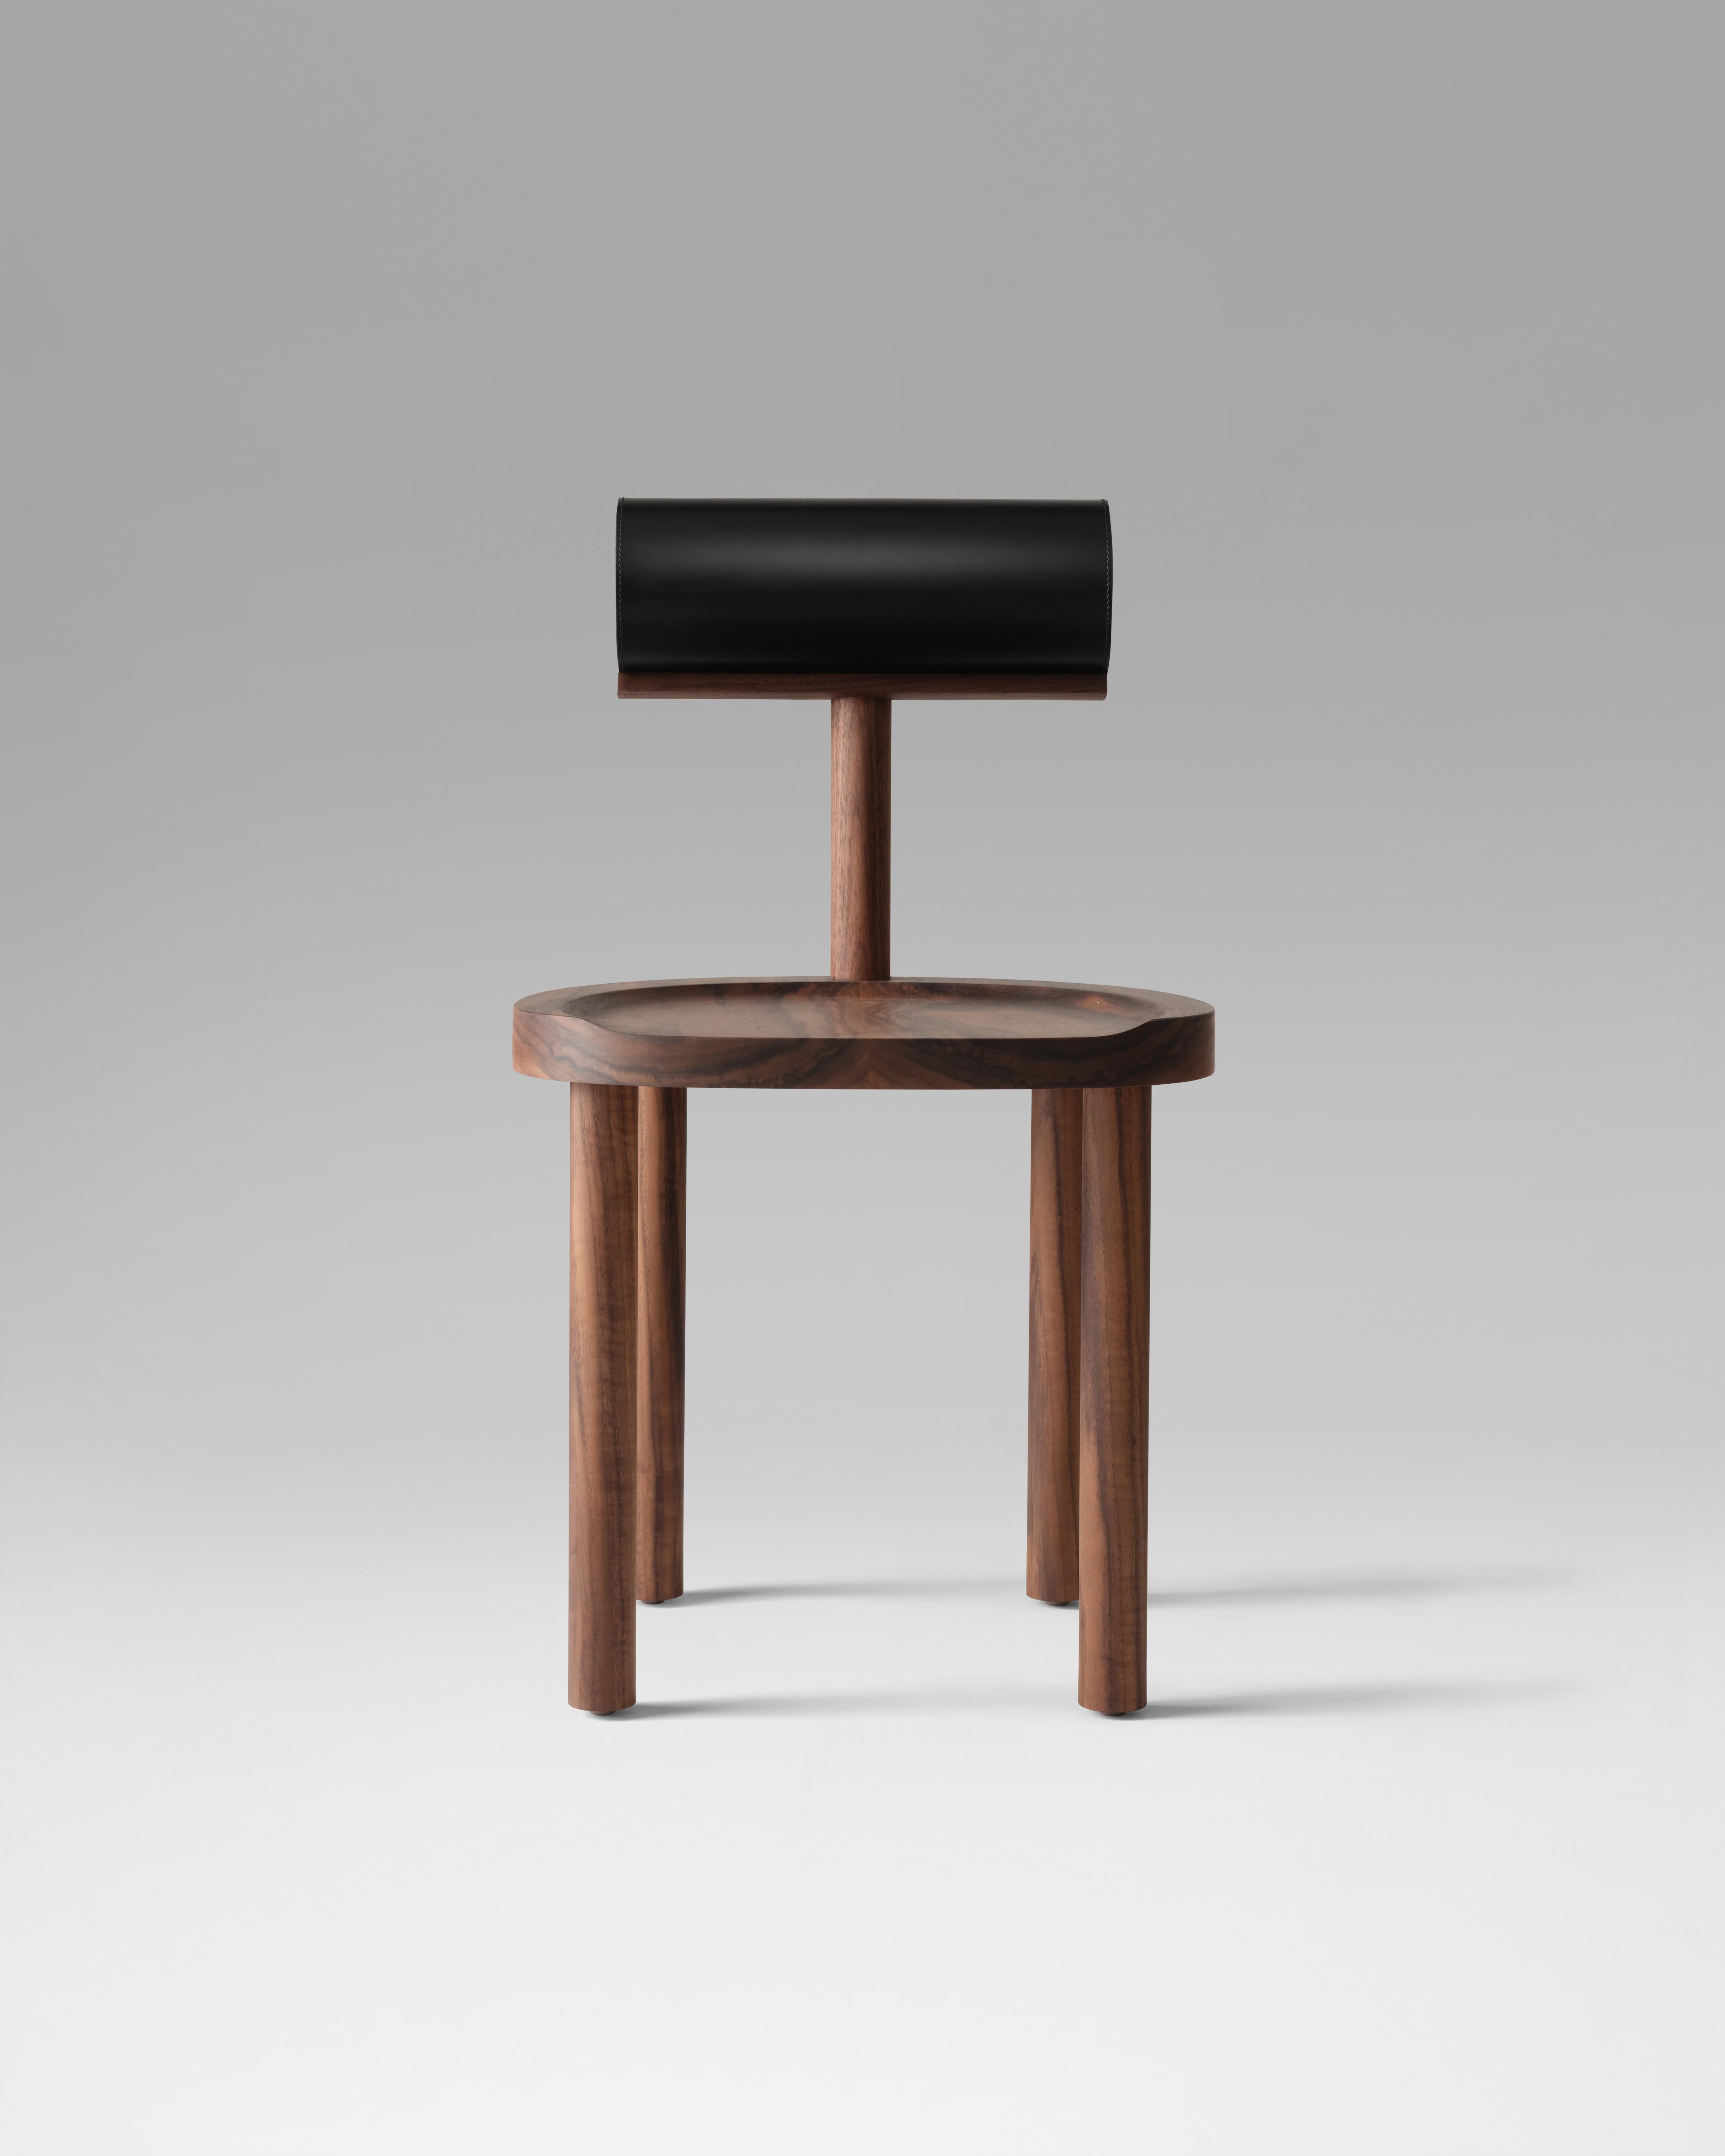 The UNA chair intersects a round wooden seat and legs with a leather upholstered cylindrical back. Using these fluid shapes allows greater focus on the details of the wood grain and pristinely stitched leather top. 
Two available now in stock, ready